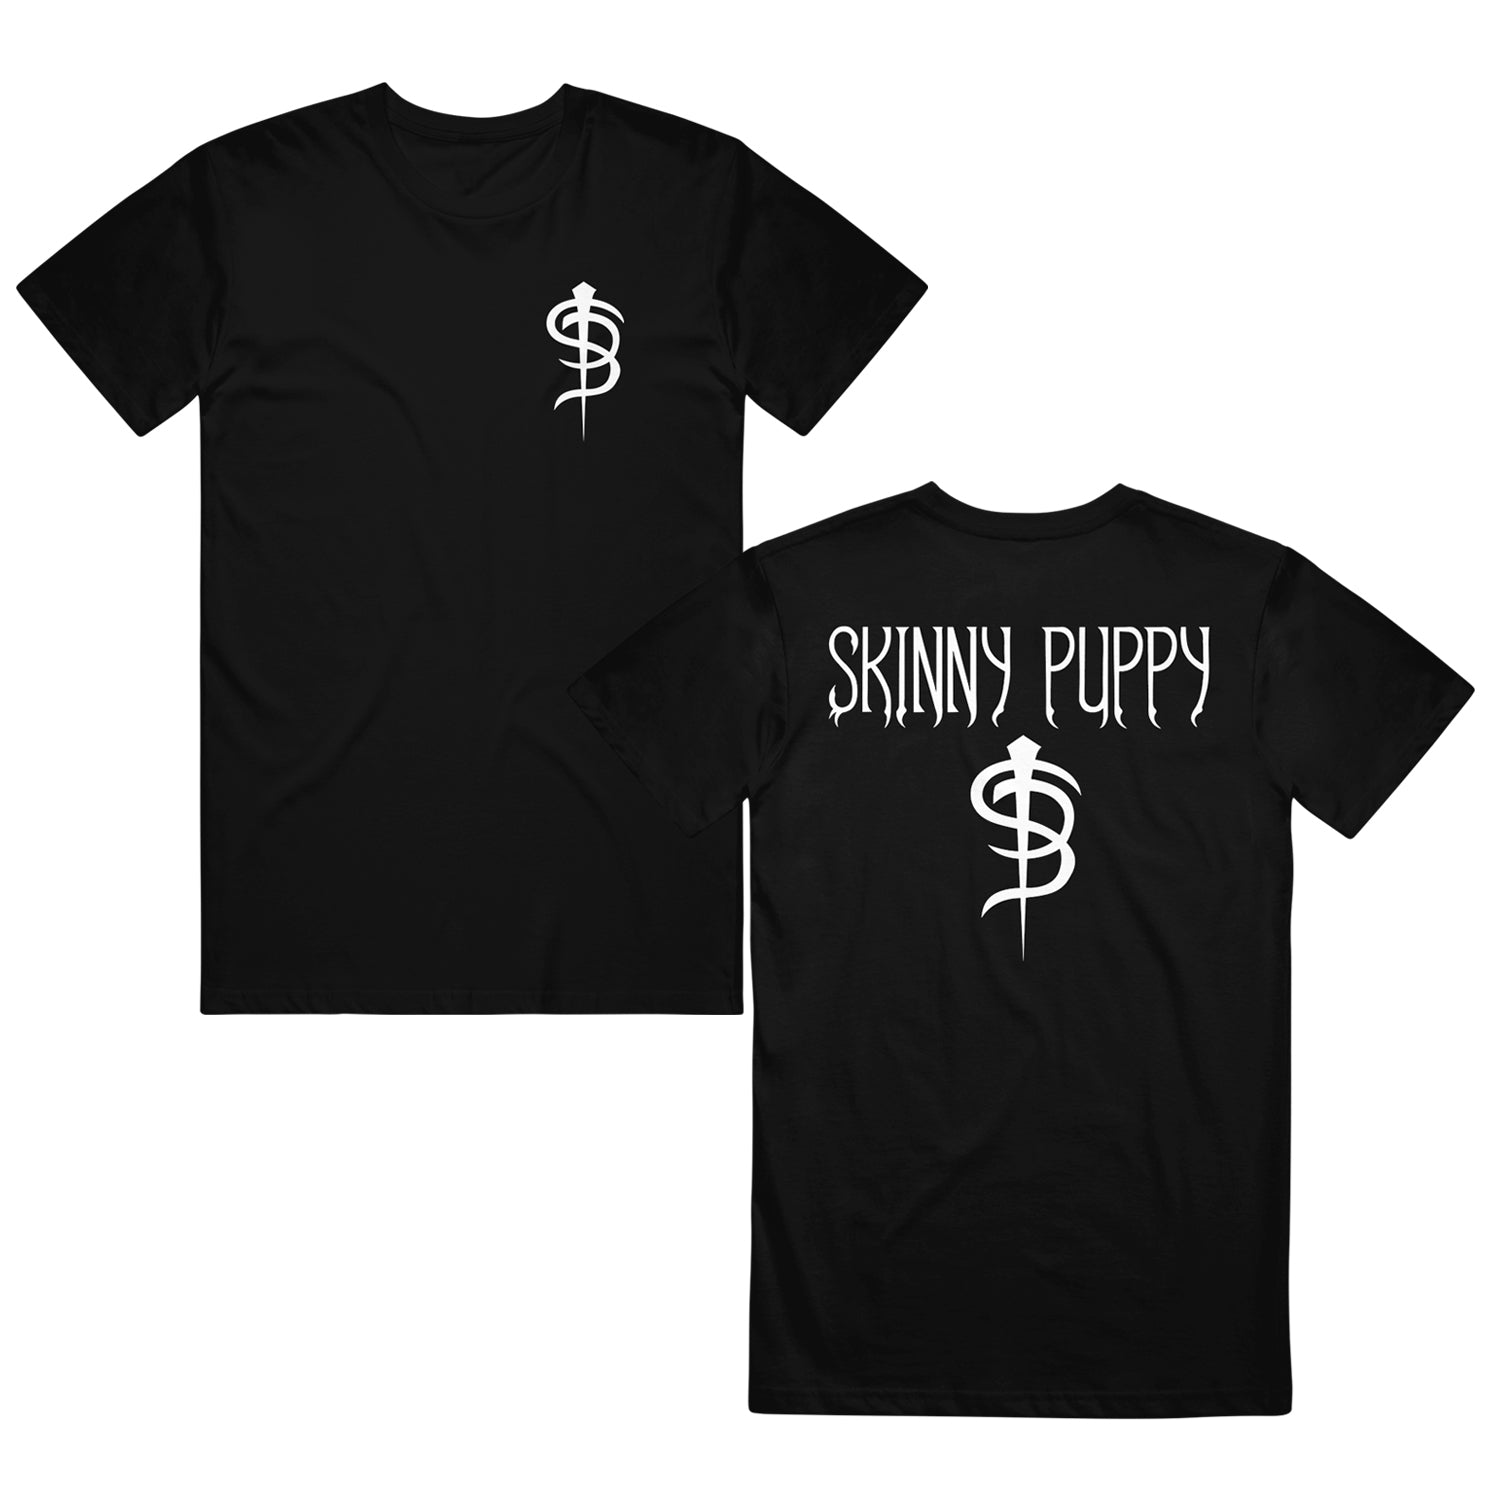 Image of the front and back of a Black tshirt on a white background. The front of the shirt on the left chest is the skinny puppy SP logo in white. The back of the shirt by the shoulder area says Skinny Puppy and below that features the SP logo. The back print on the shirt is also in white.